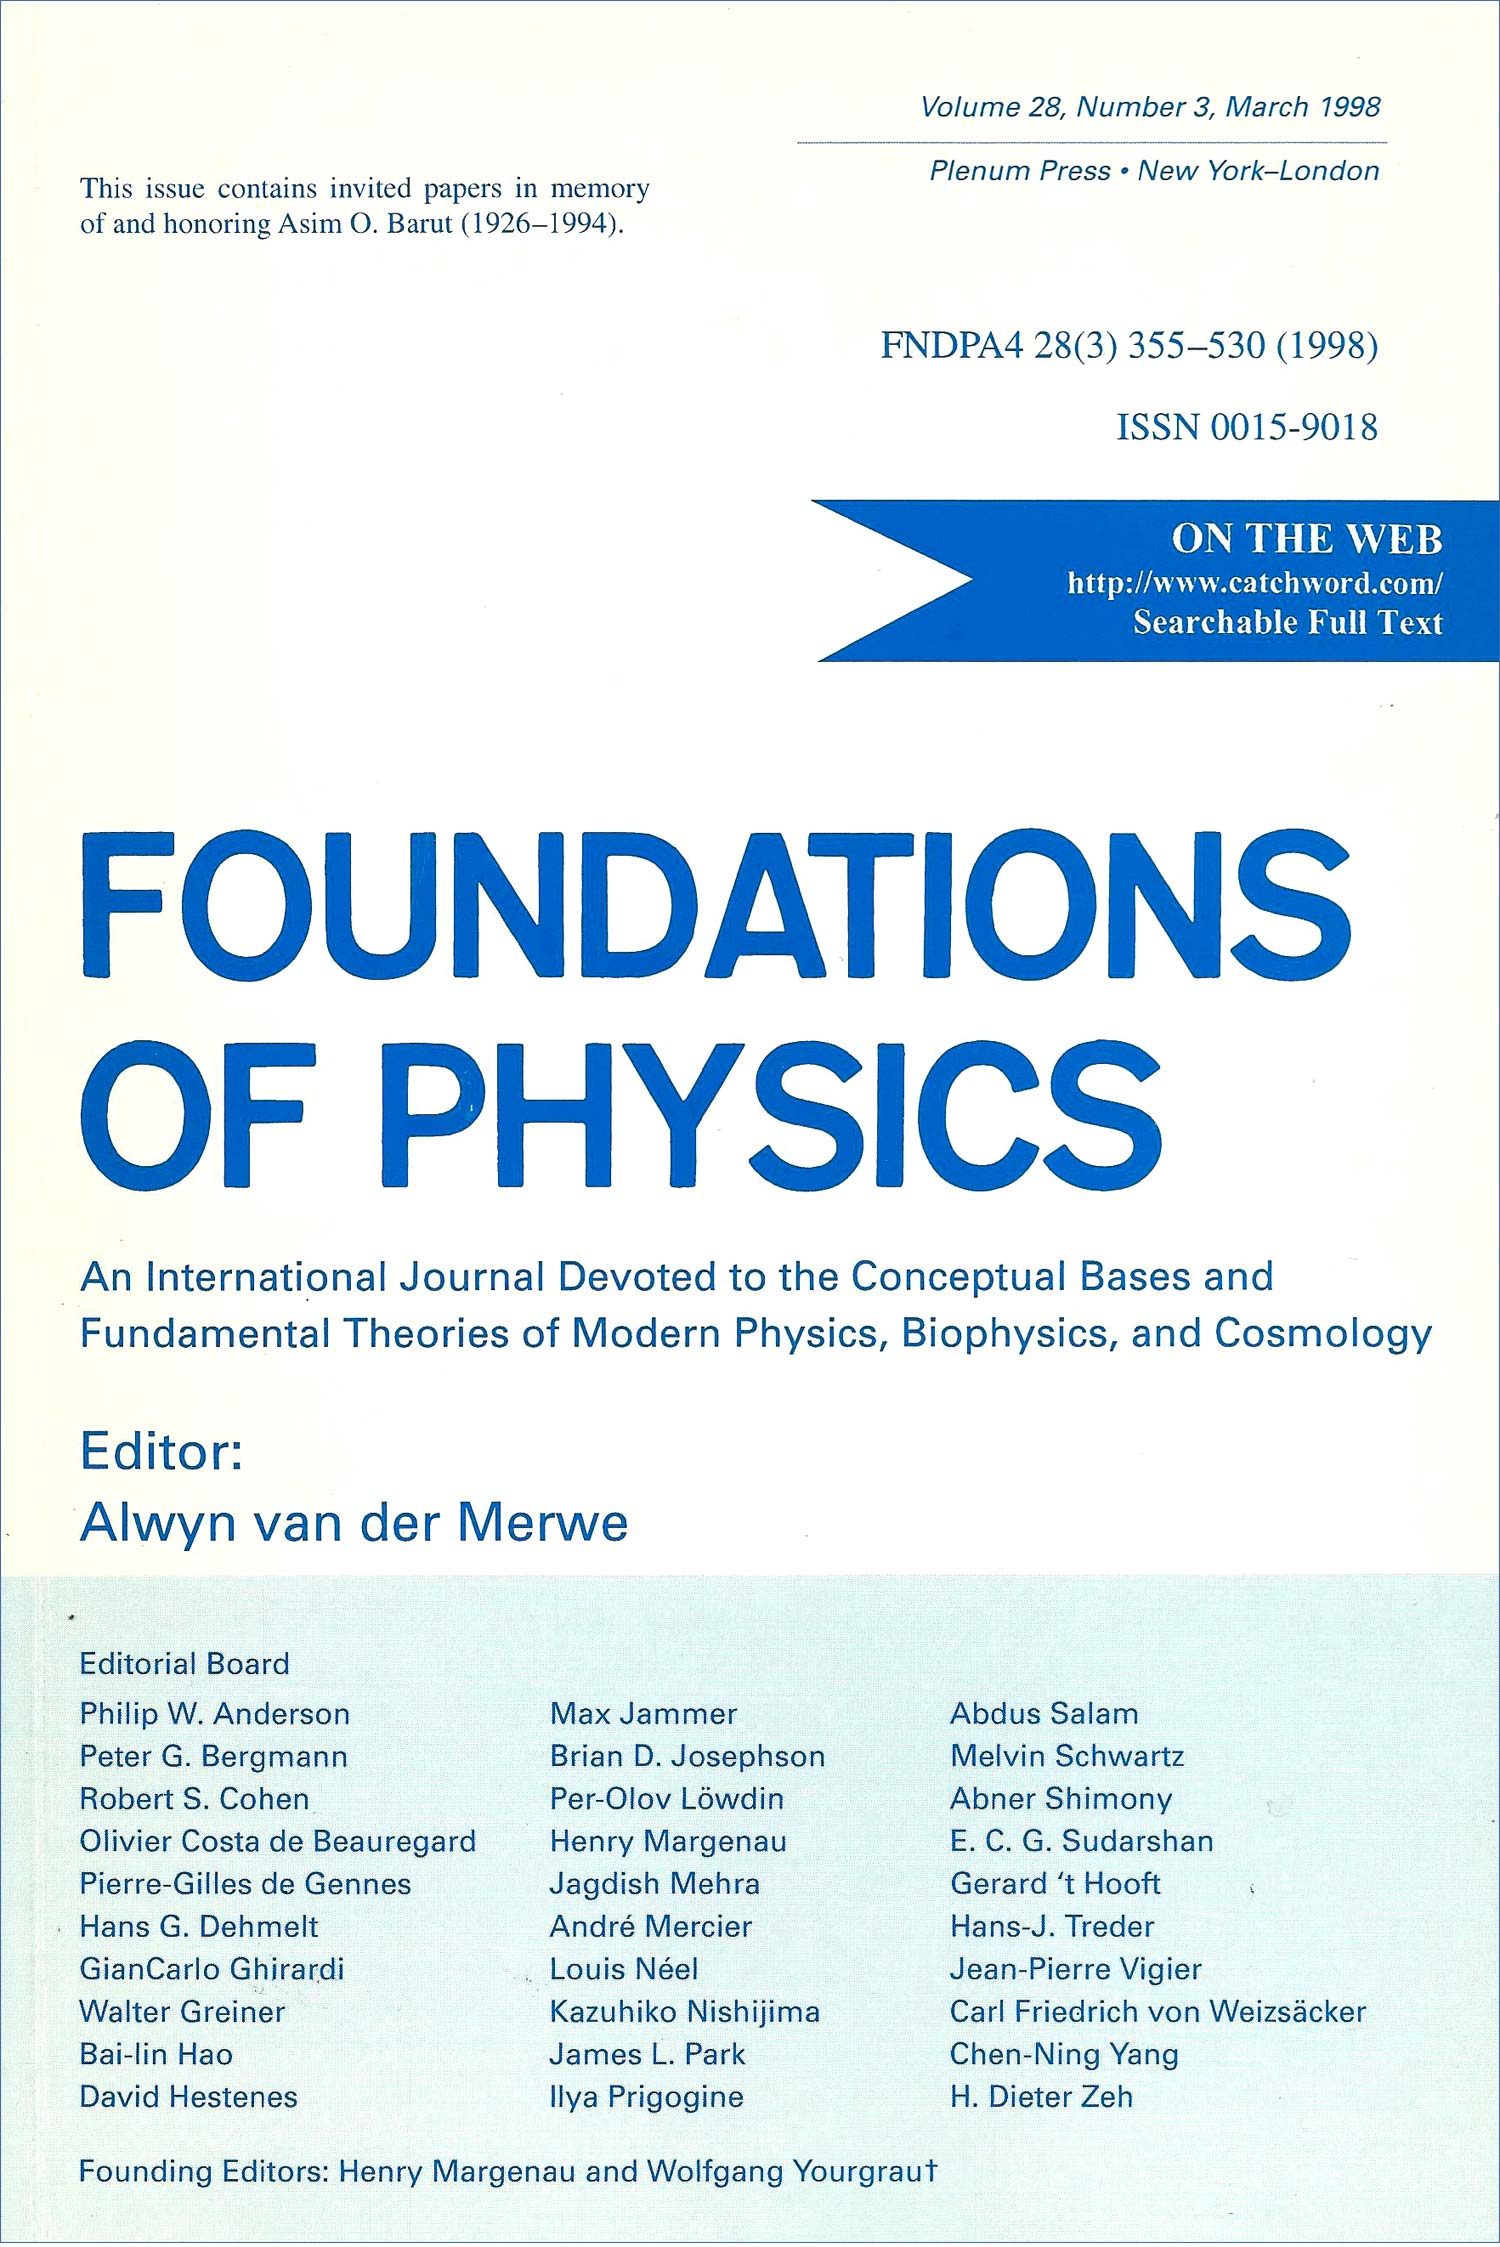 Foundations of Physics, Vol. 28, Number 3, March 1998 | An International Journal Devoted to the Conceptual Bases and Fundemental Theories of Modern Physics, Biophysics, and Cosmology | This issue contains invited papers in memory of and honoring Asim O. Barut (1926-1994).